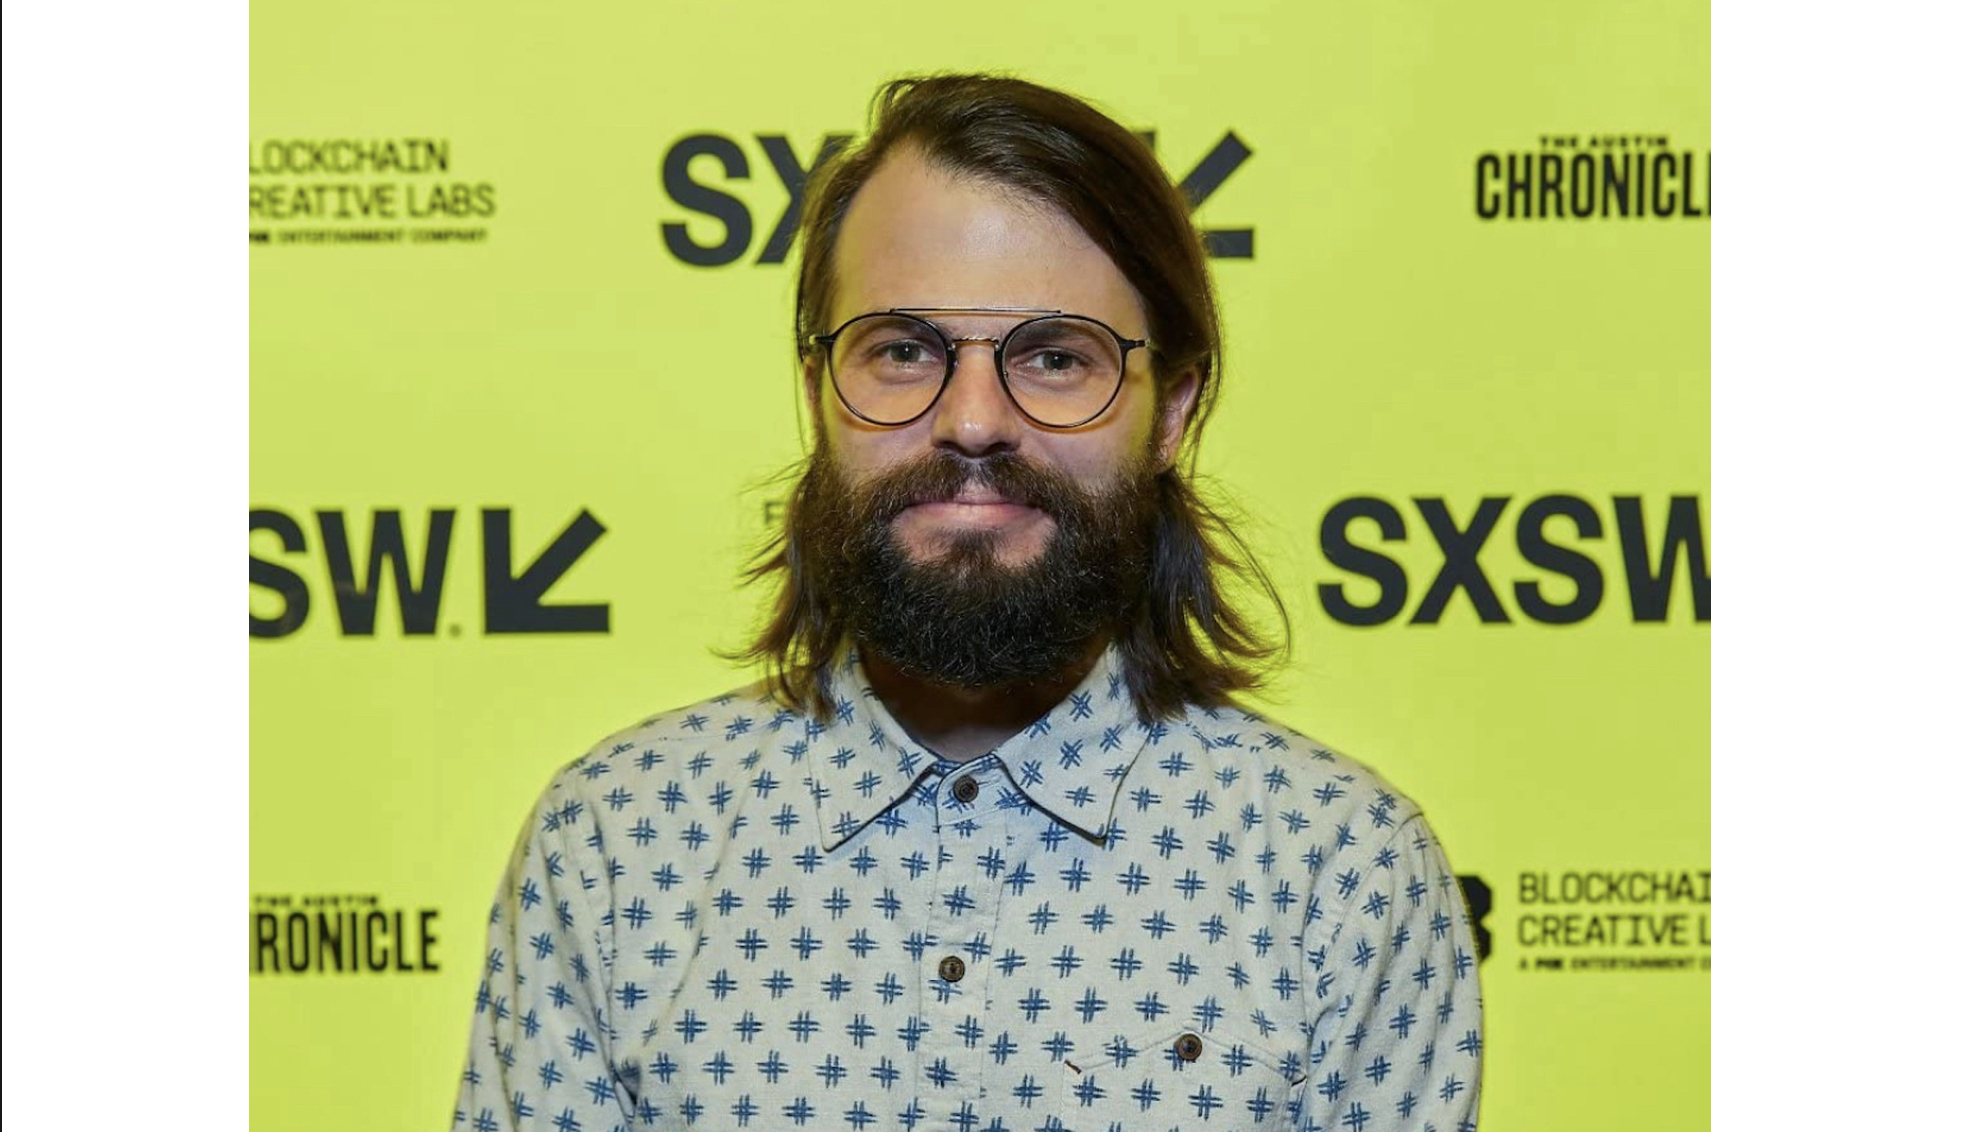 A color photo of Colin West, a white man with dark brown shoulder-length hair and facial hair, in front of a bright yellow background with the SXSW logo on it.